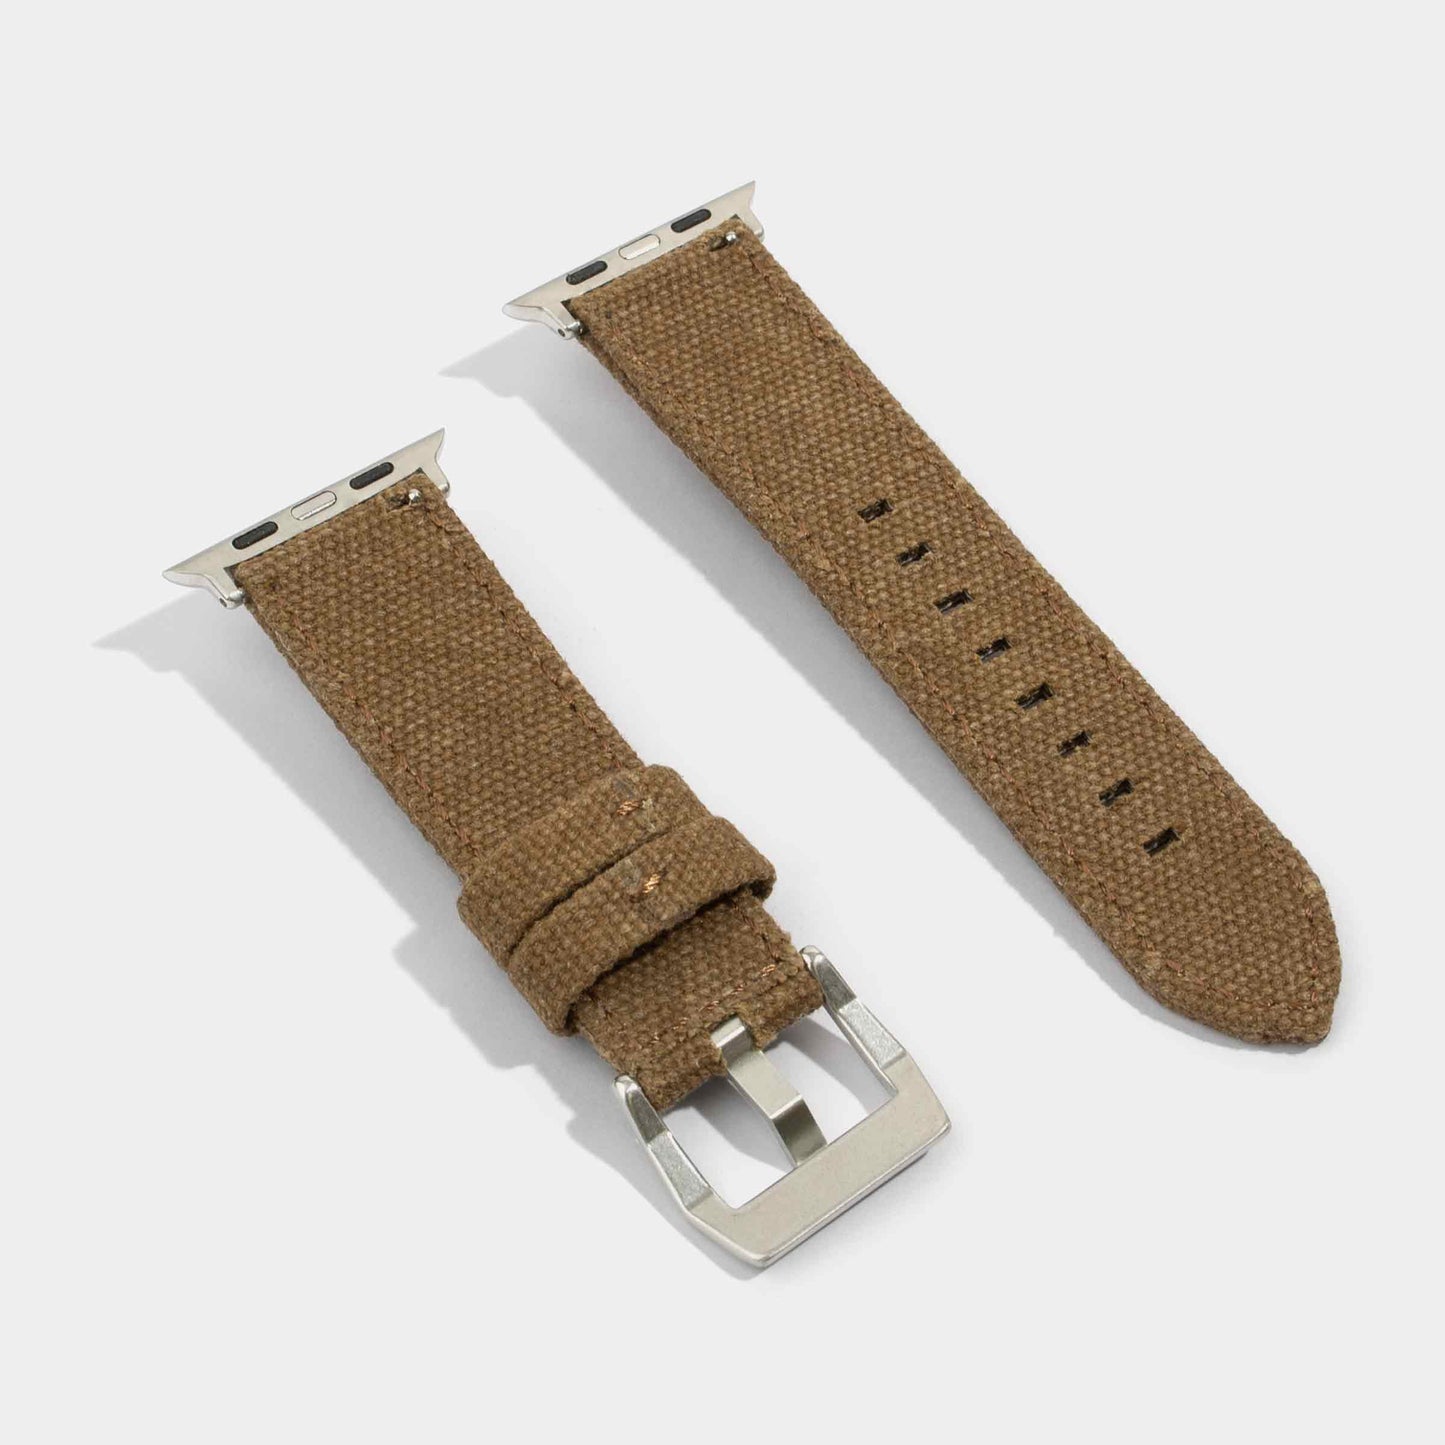 Apple Watch Strap-Canvas Watch Strap-Pineapple Mountain Printed Canvas Watch Strap